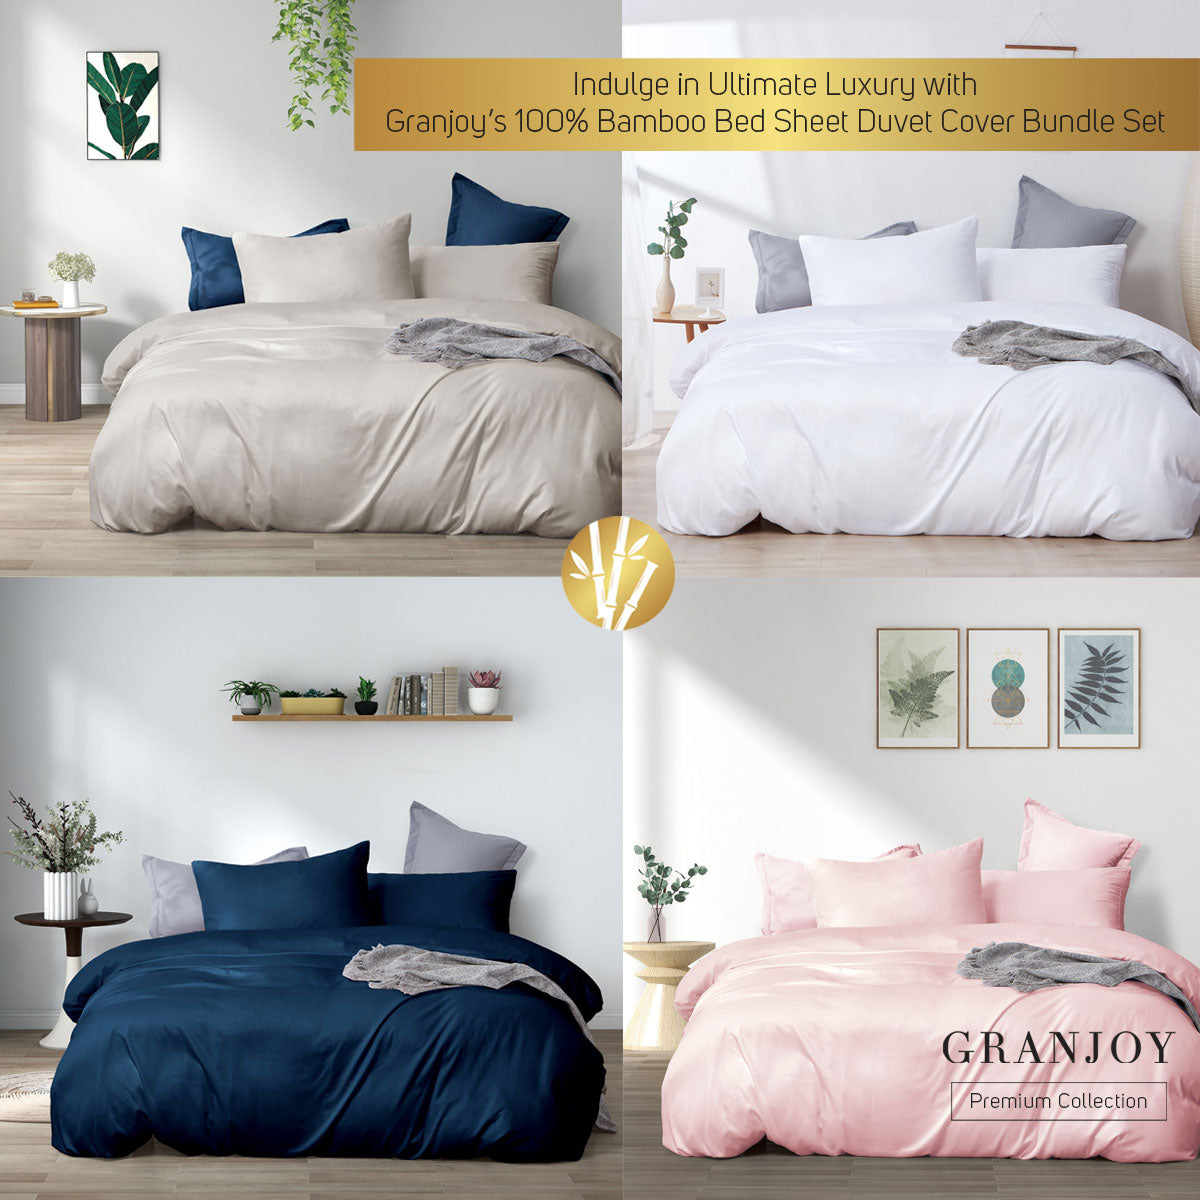 Bamboo Bed Sheets Duvet Cover Bundle Set in 4 Colors